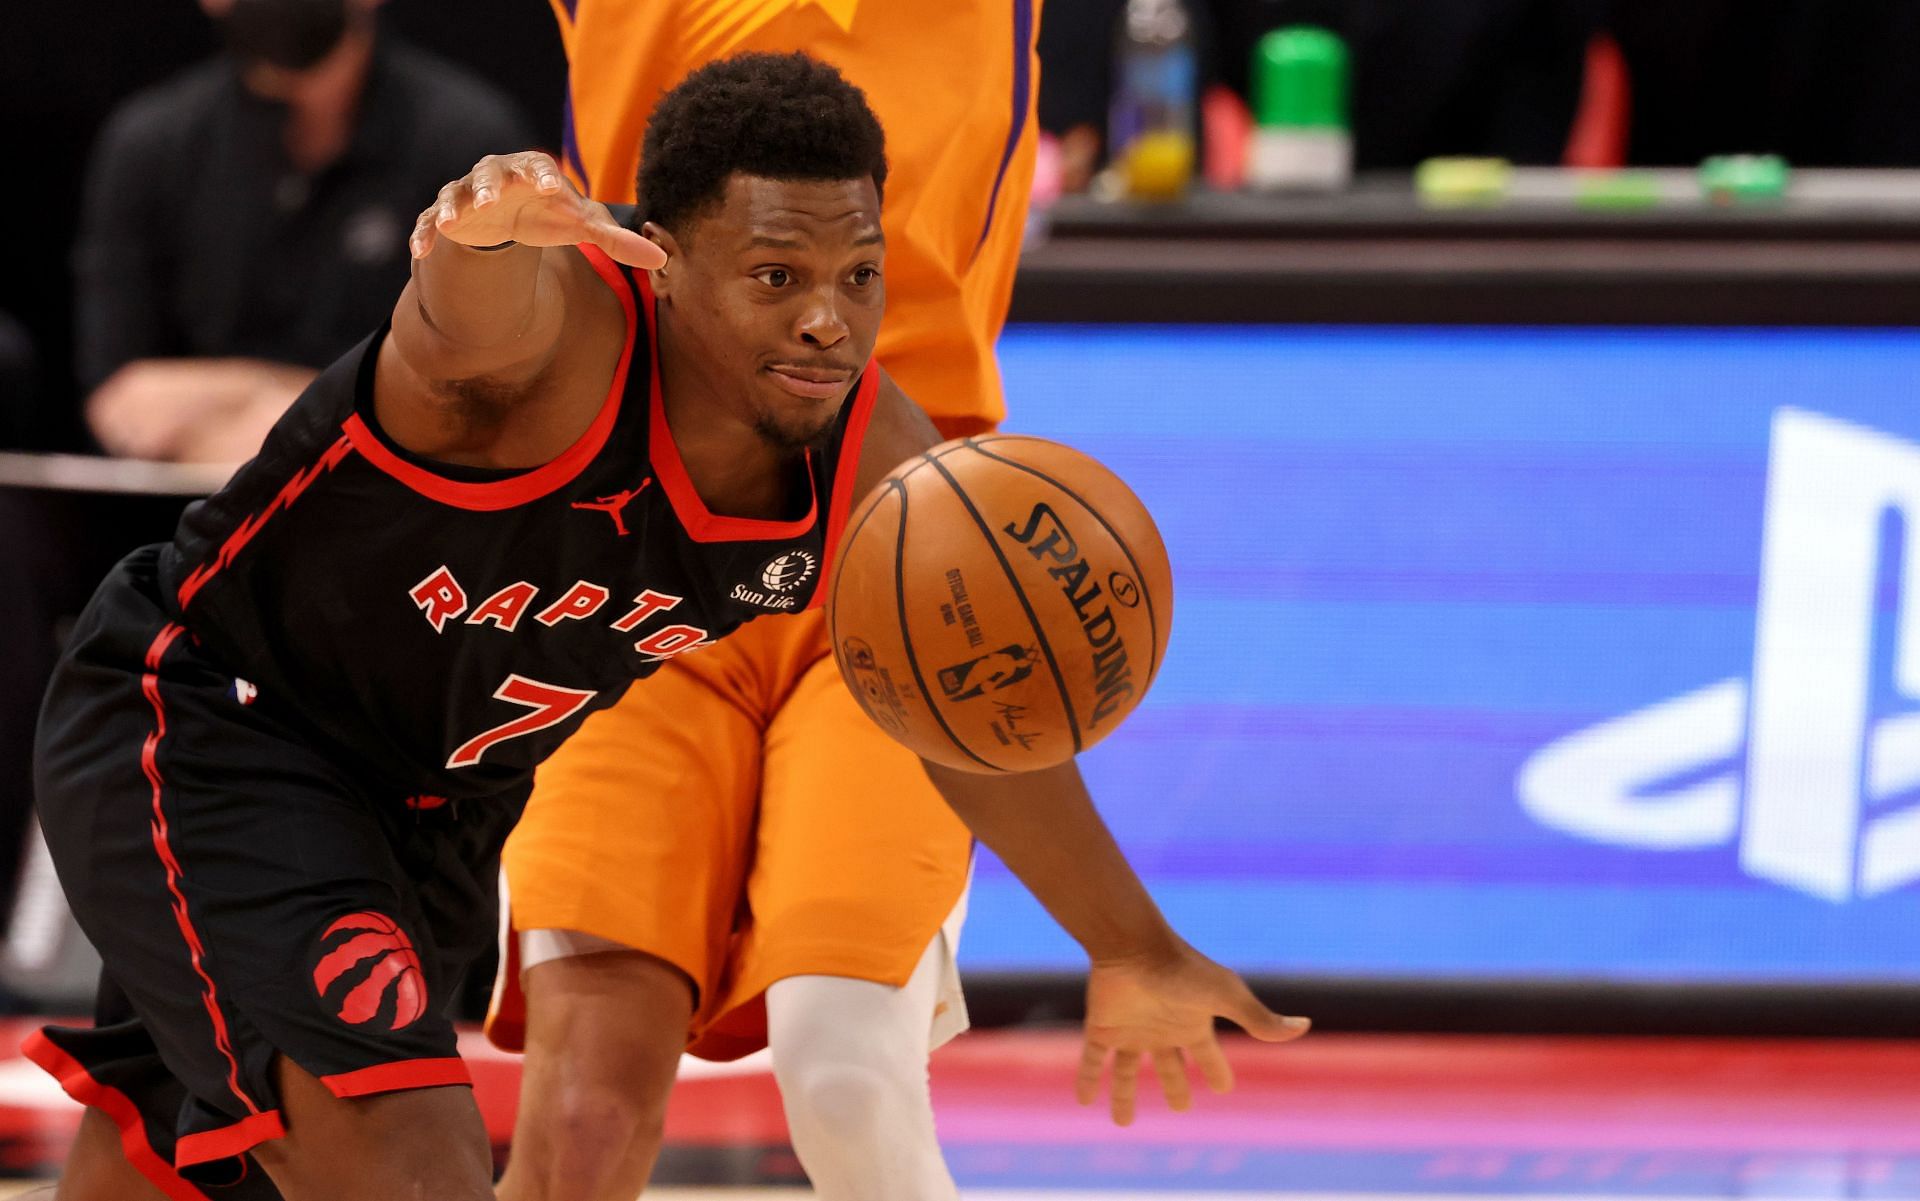 Kyle Lowry #7 of the Toronto Raptors passes during a game against the Phoenix Suns at Amalie Arena on March 26, 2021 in Tampa, Florida.